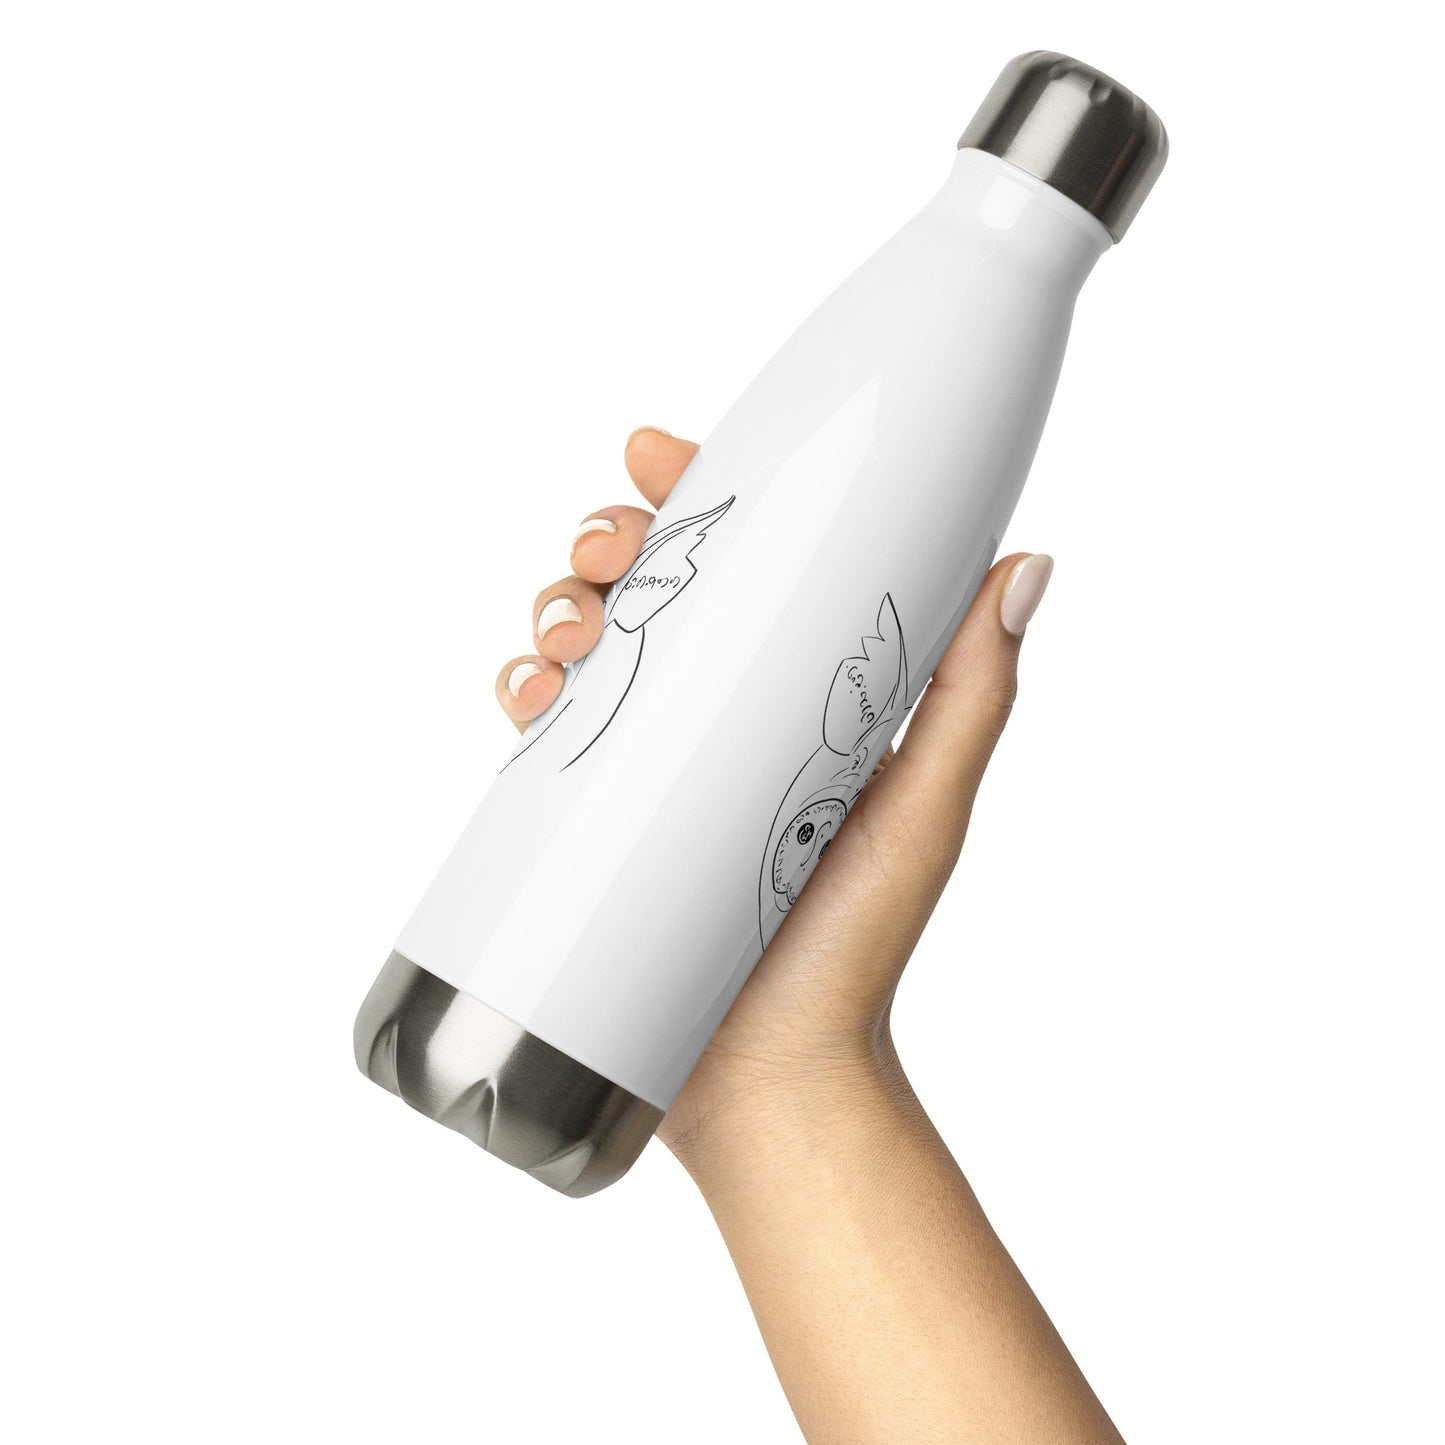 Animal Totem SOW Stainless Steel Water BottleAnimal Totem SOW Stainless Steel Water Bottle